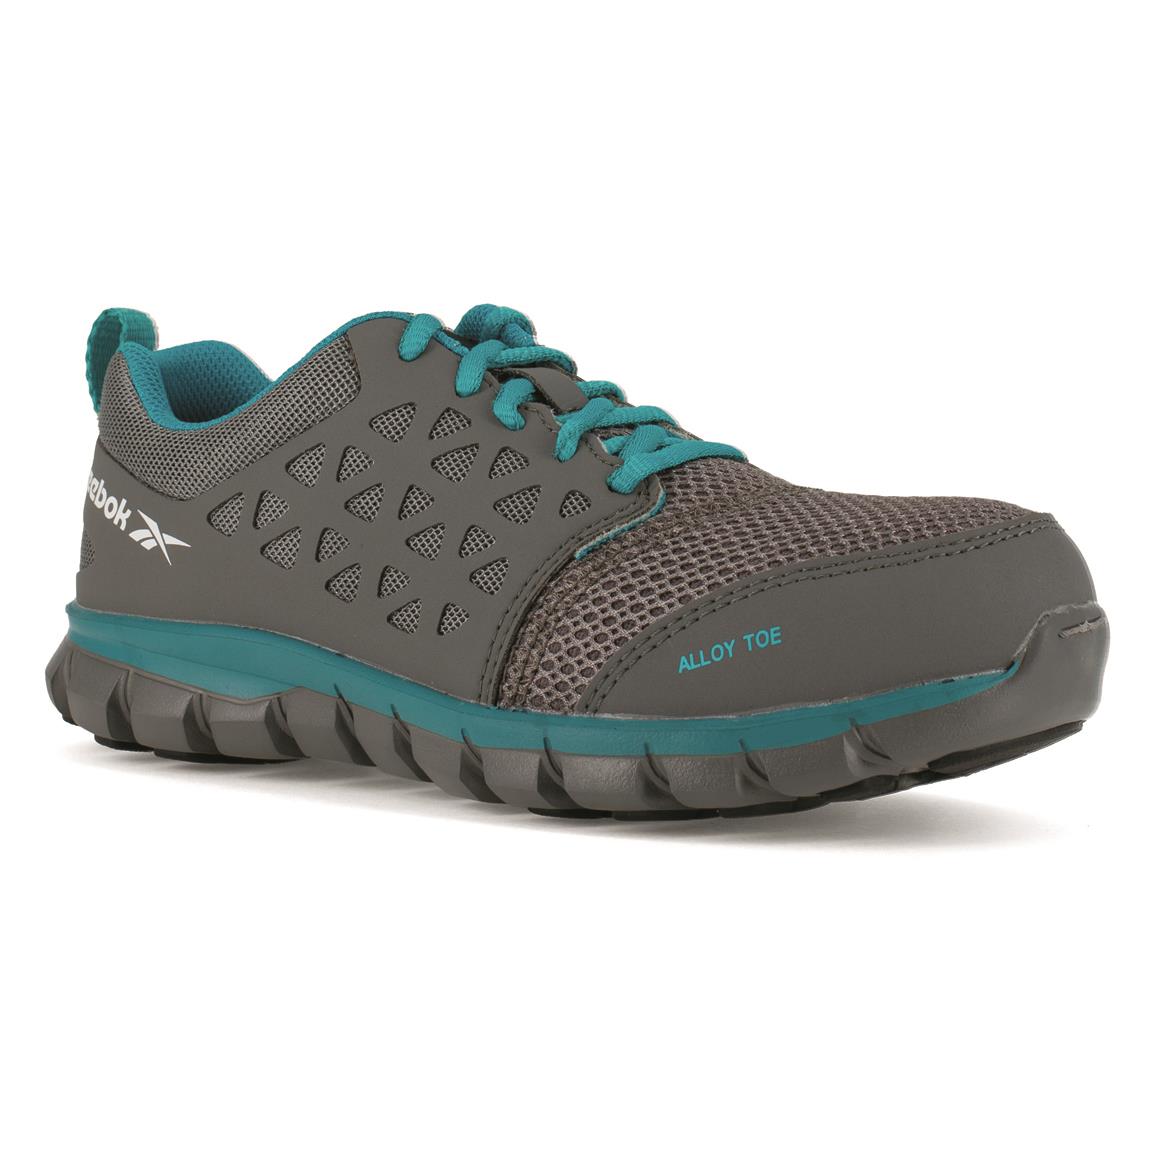 Reebok Women's Sublite Alloy Toe SD Athletic Work Shoes, Gray/turquoise